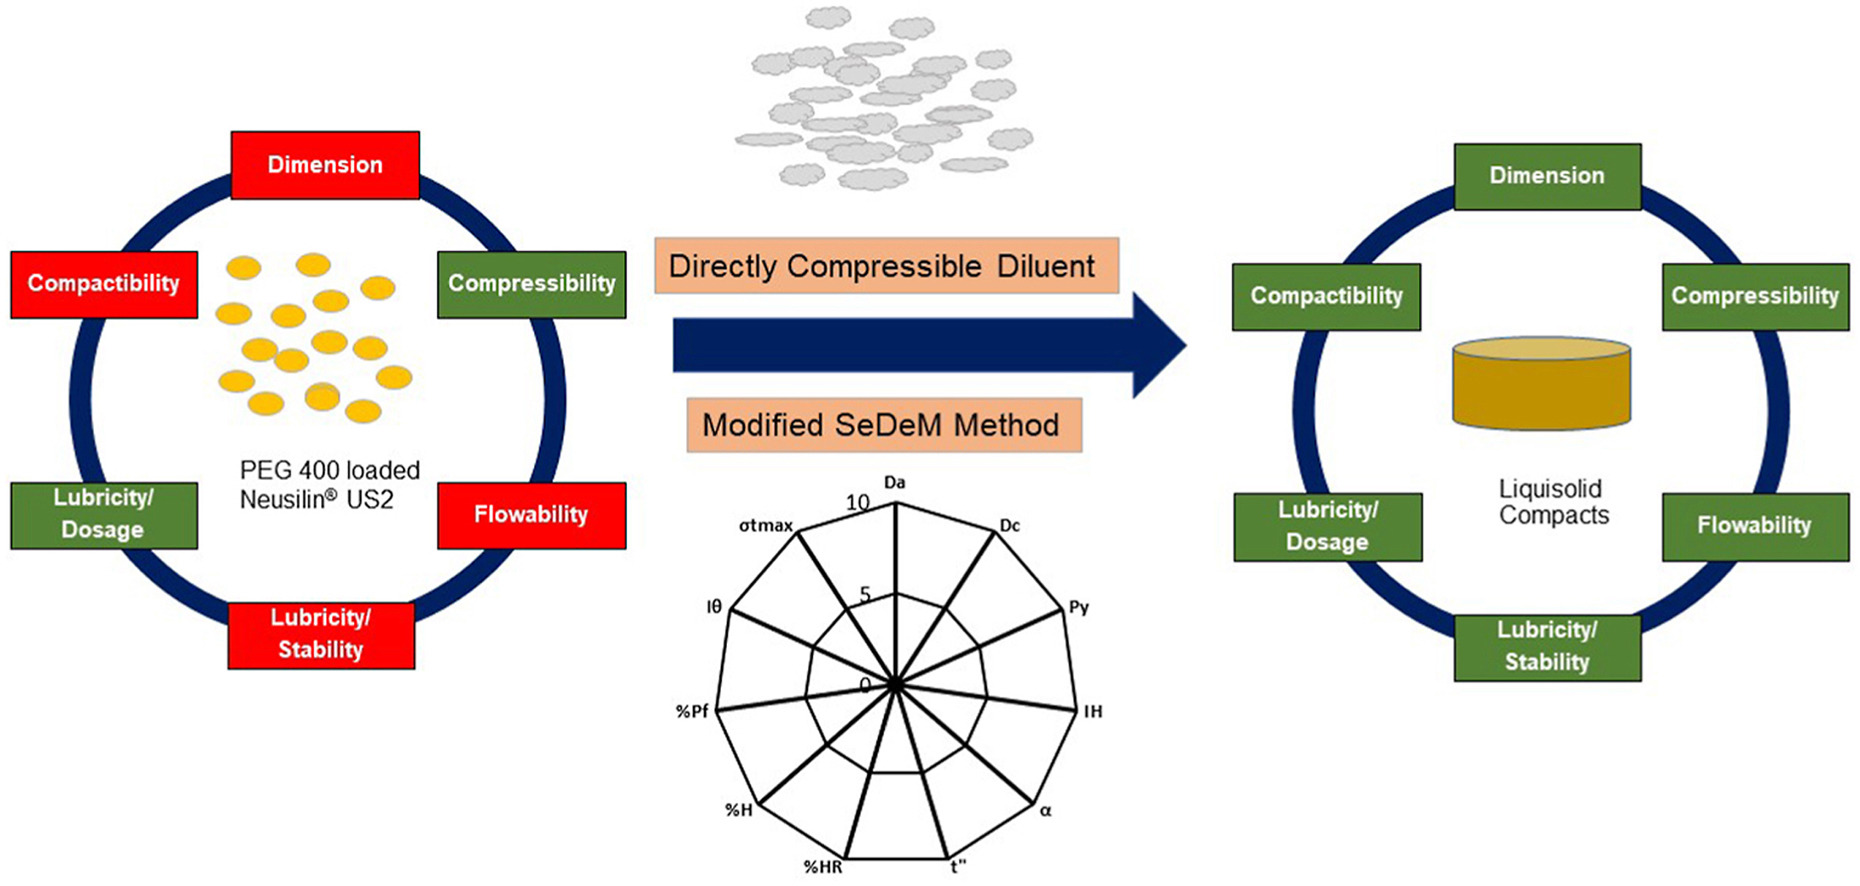 Modified SeDeM Expert Diagram System for Selection of Direct Compression Excipient for Liquisolid Formulation of Neusilin® US2